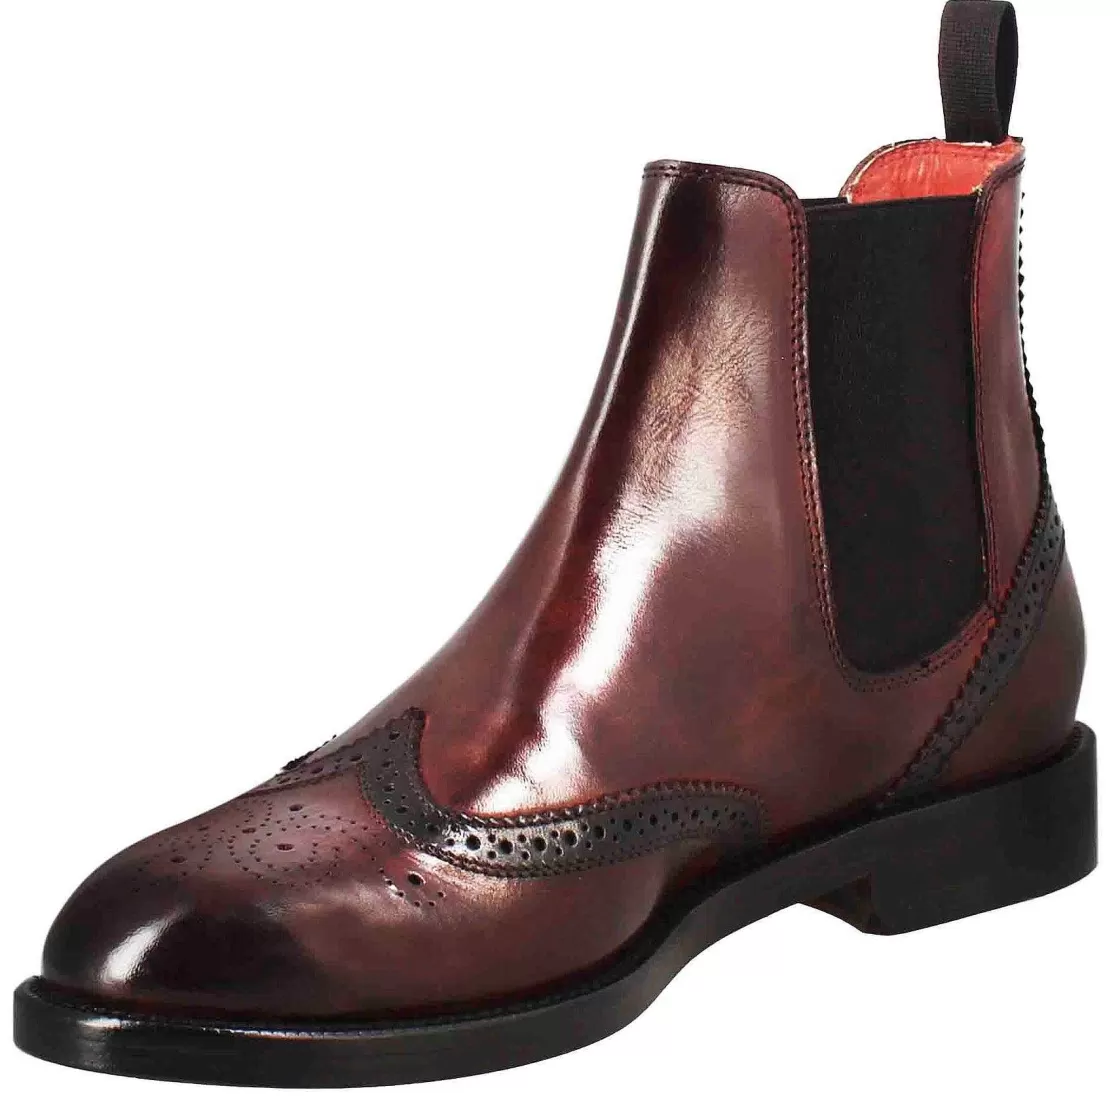 Leonardo Women'S Chelsea Boot With Brogue Details In Burgundy Leather Outlet